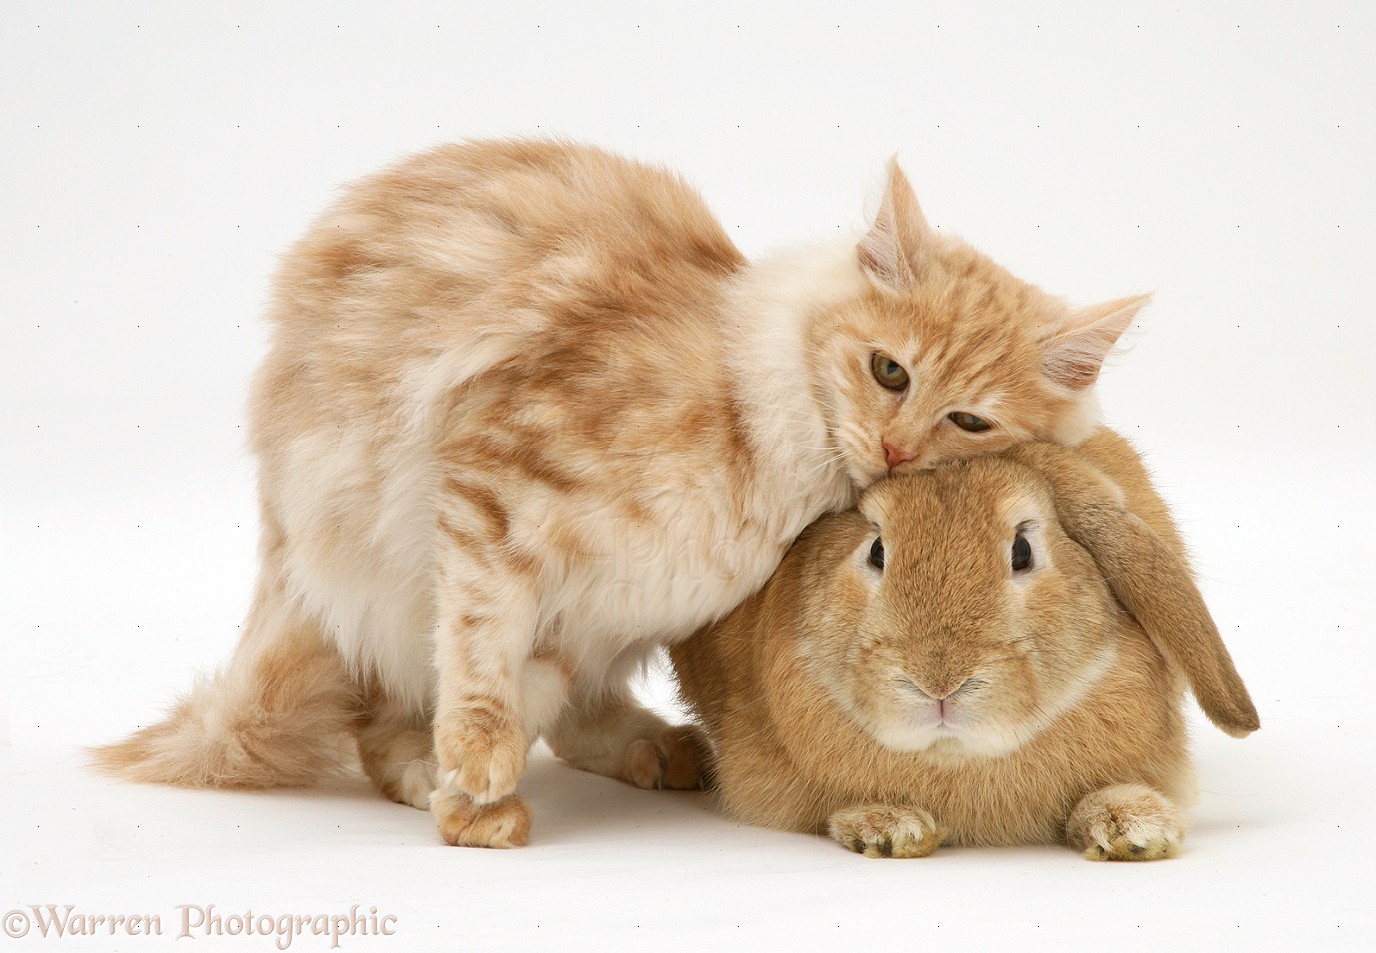 Pets Ginger rabbit and cat photo WP18021